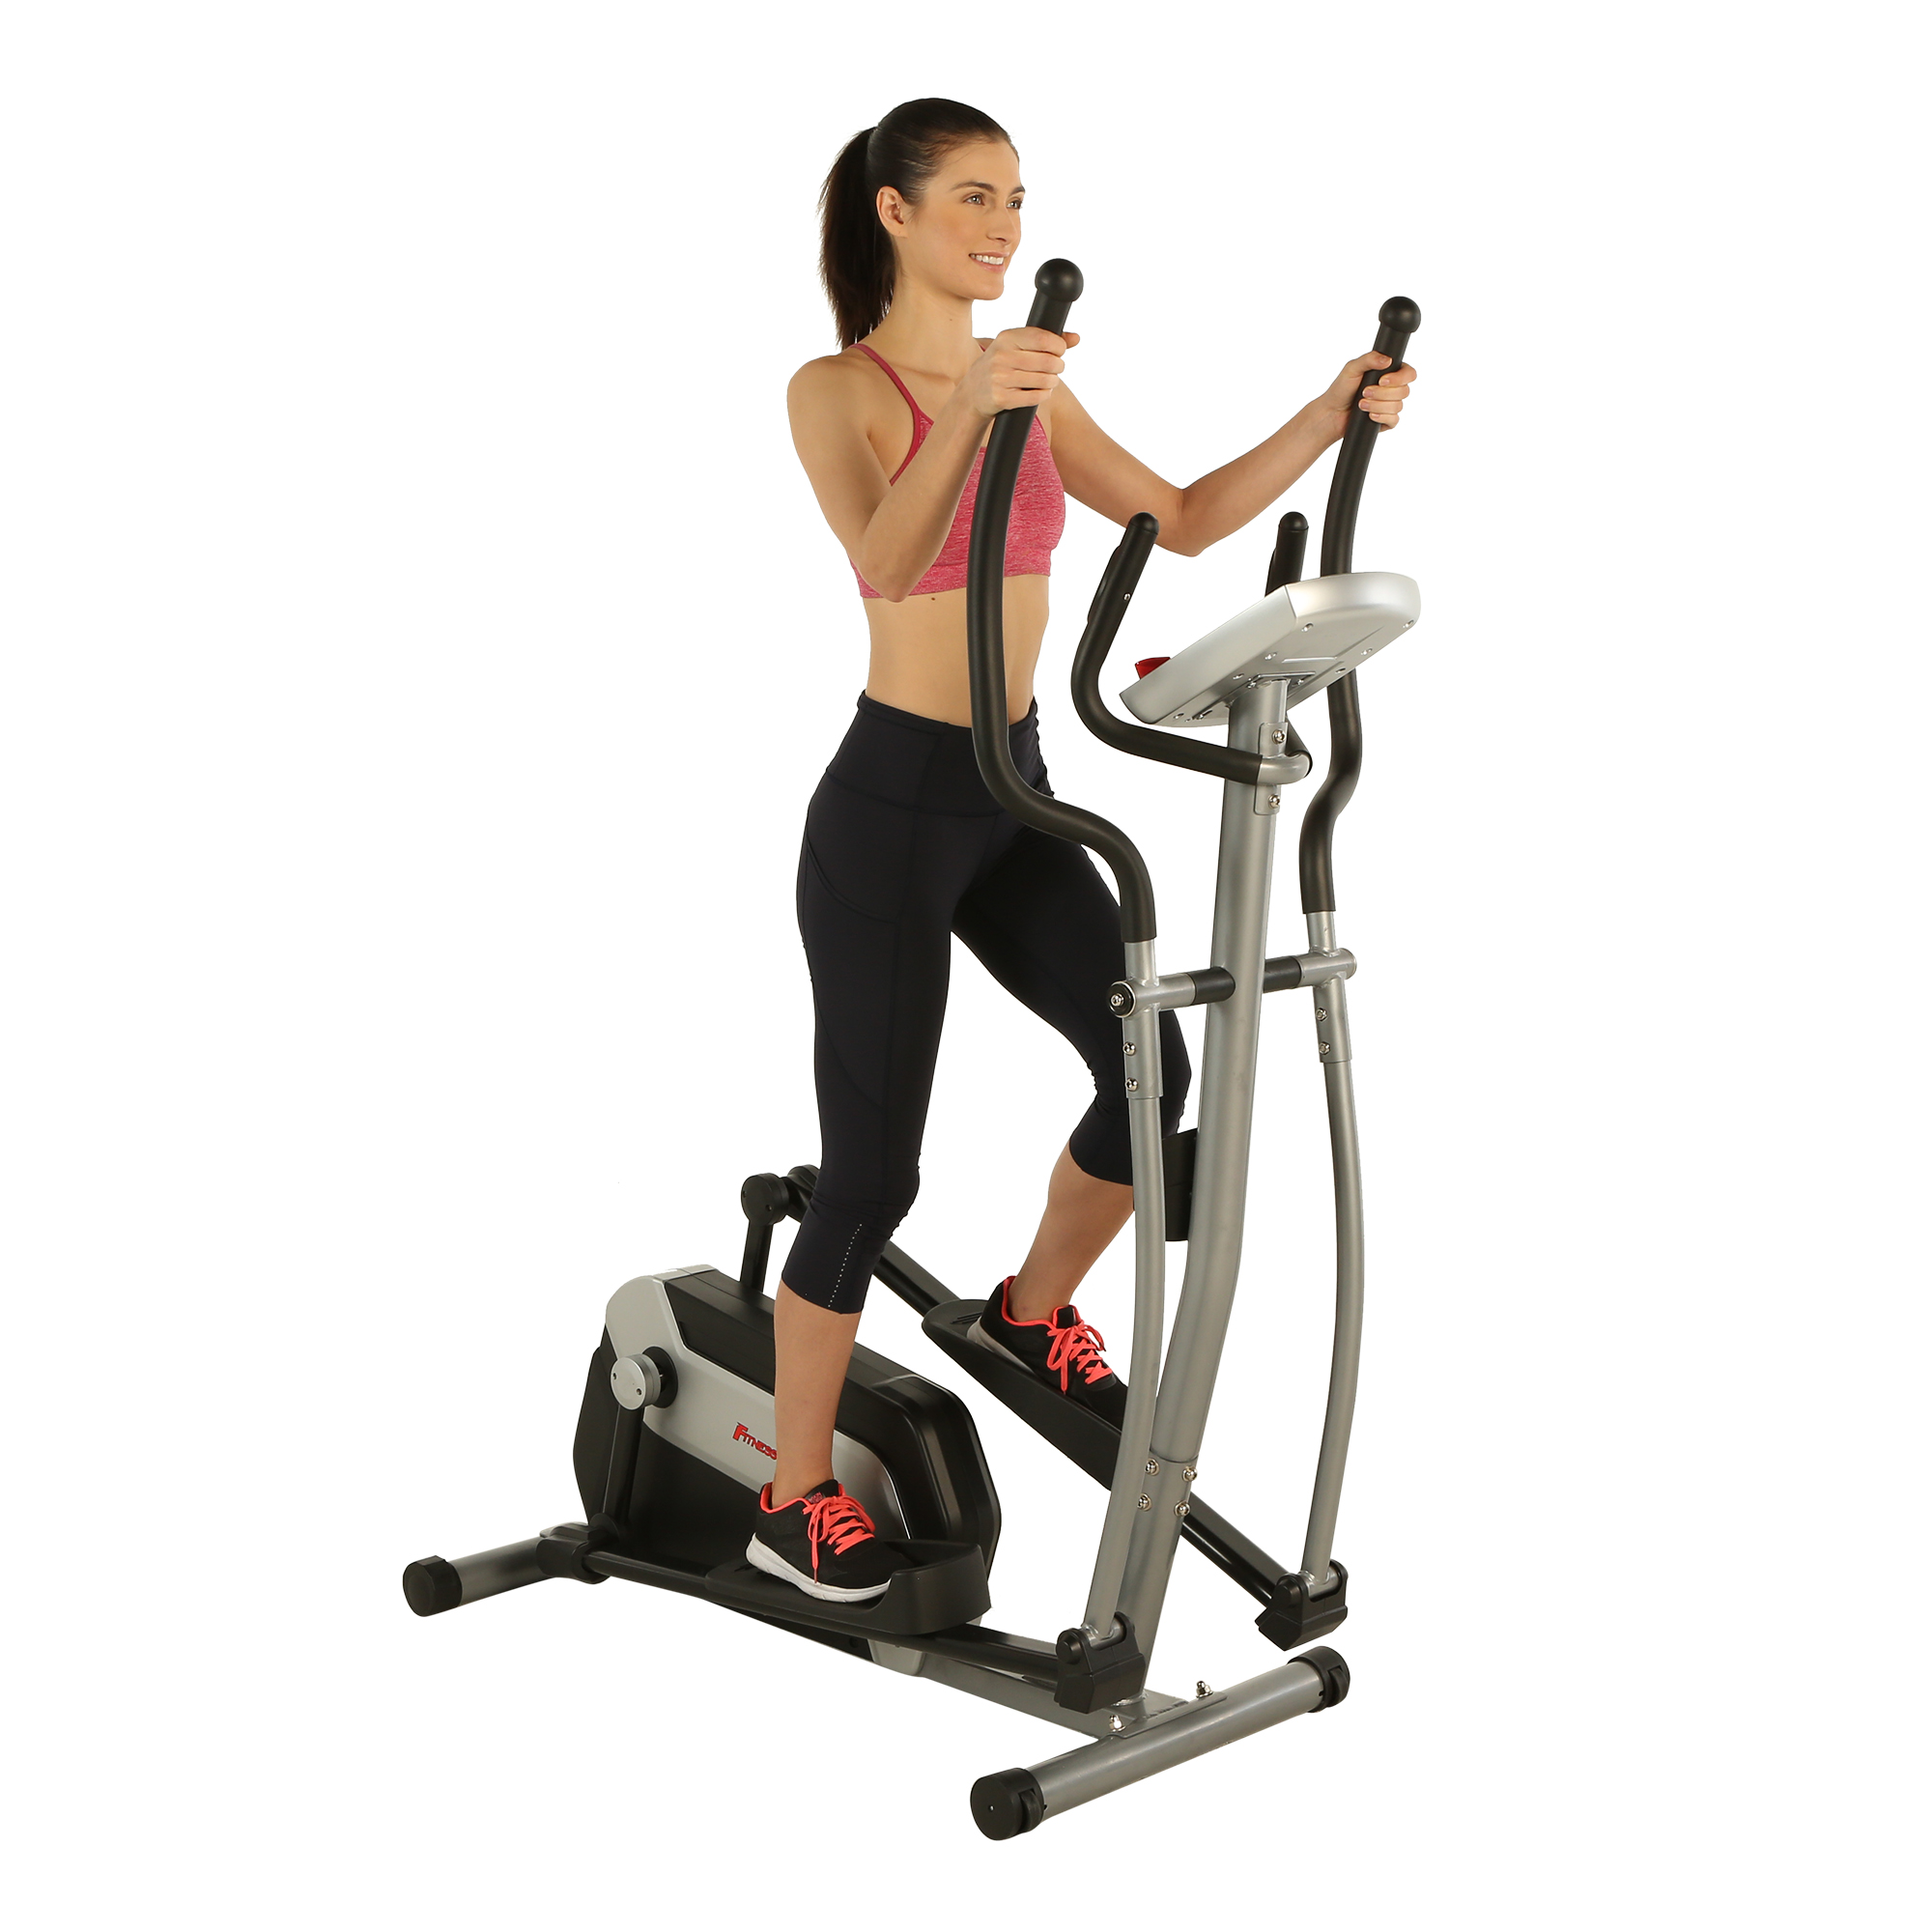 FITNESS REALITY Ei7500XL Bluetooth Magnetic Elliptical Trainer, 18” Stride, Goal Setting and Free App - image 5 of 20